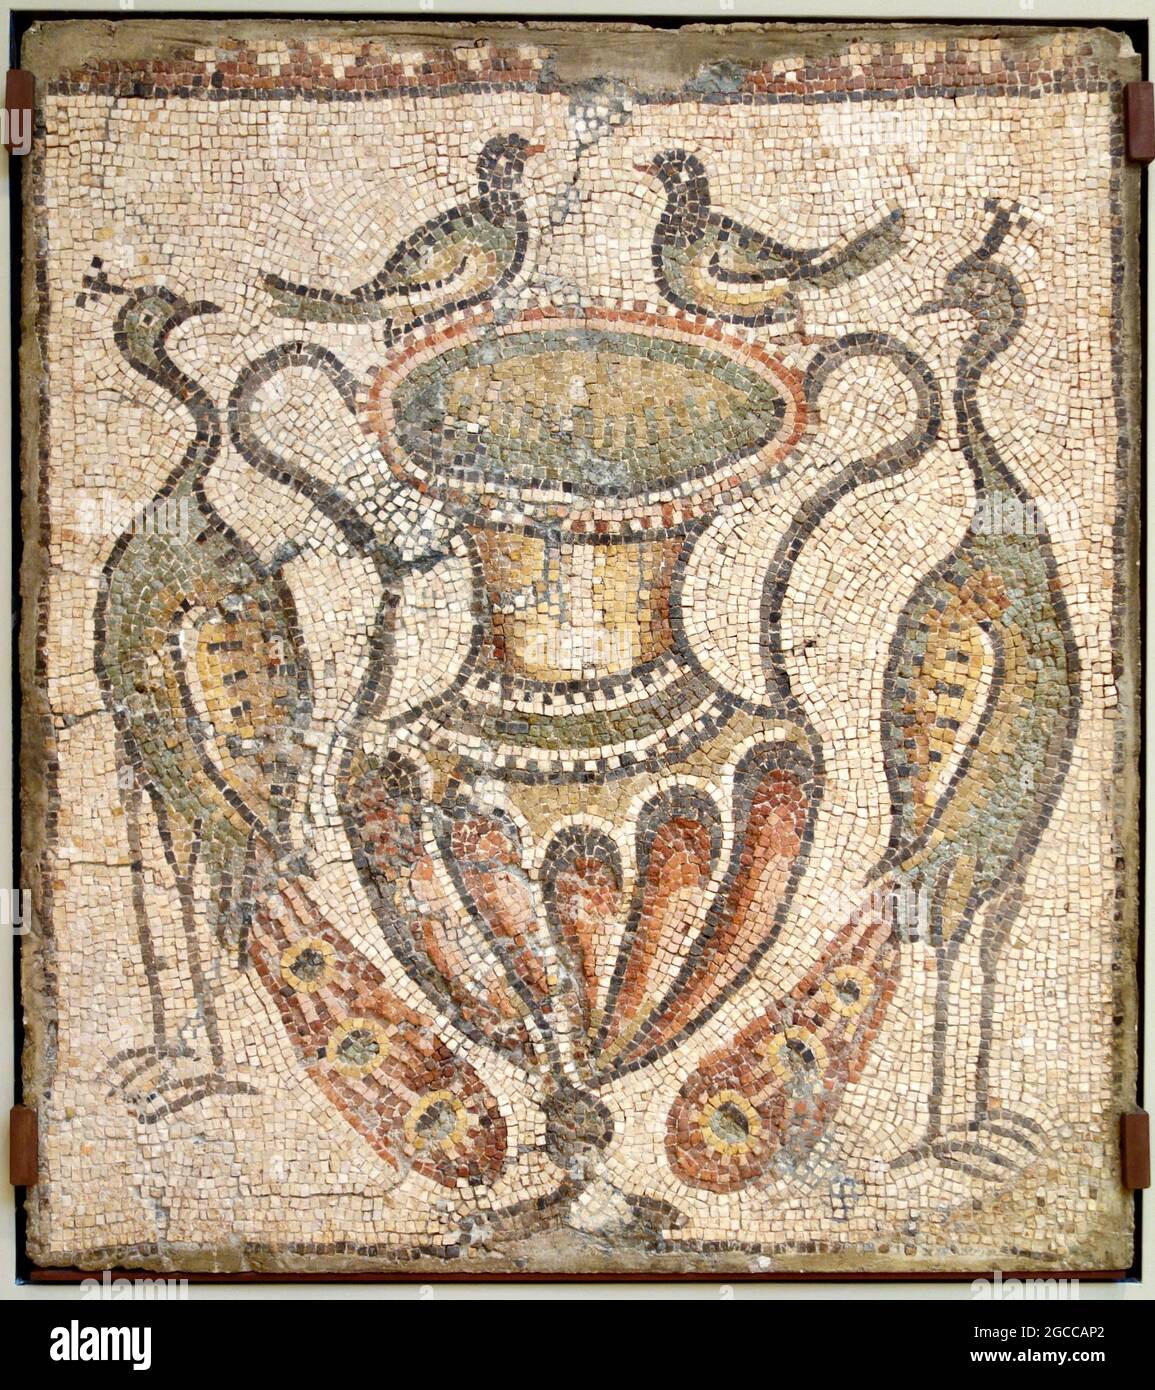 Mosaic Art - Mosaic of Amphora with Doves on Rim and Flanked by Peacocks from Homs, Syria Stock Photo